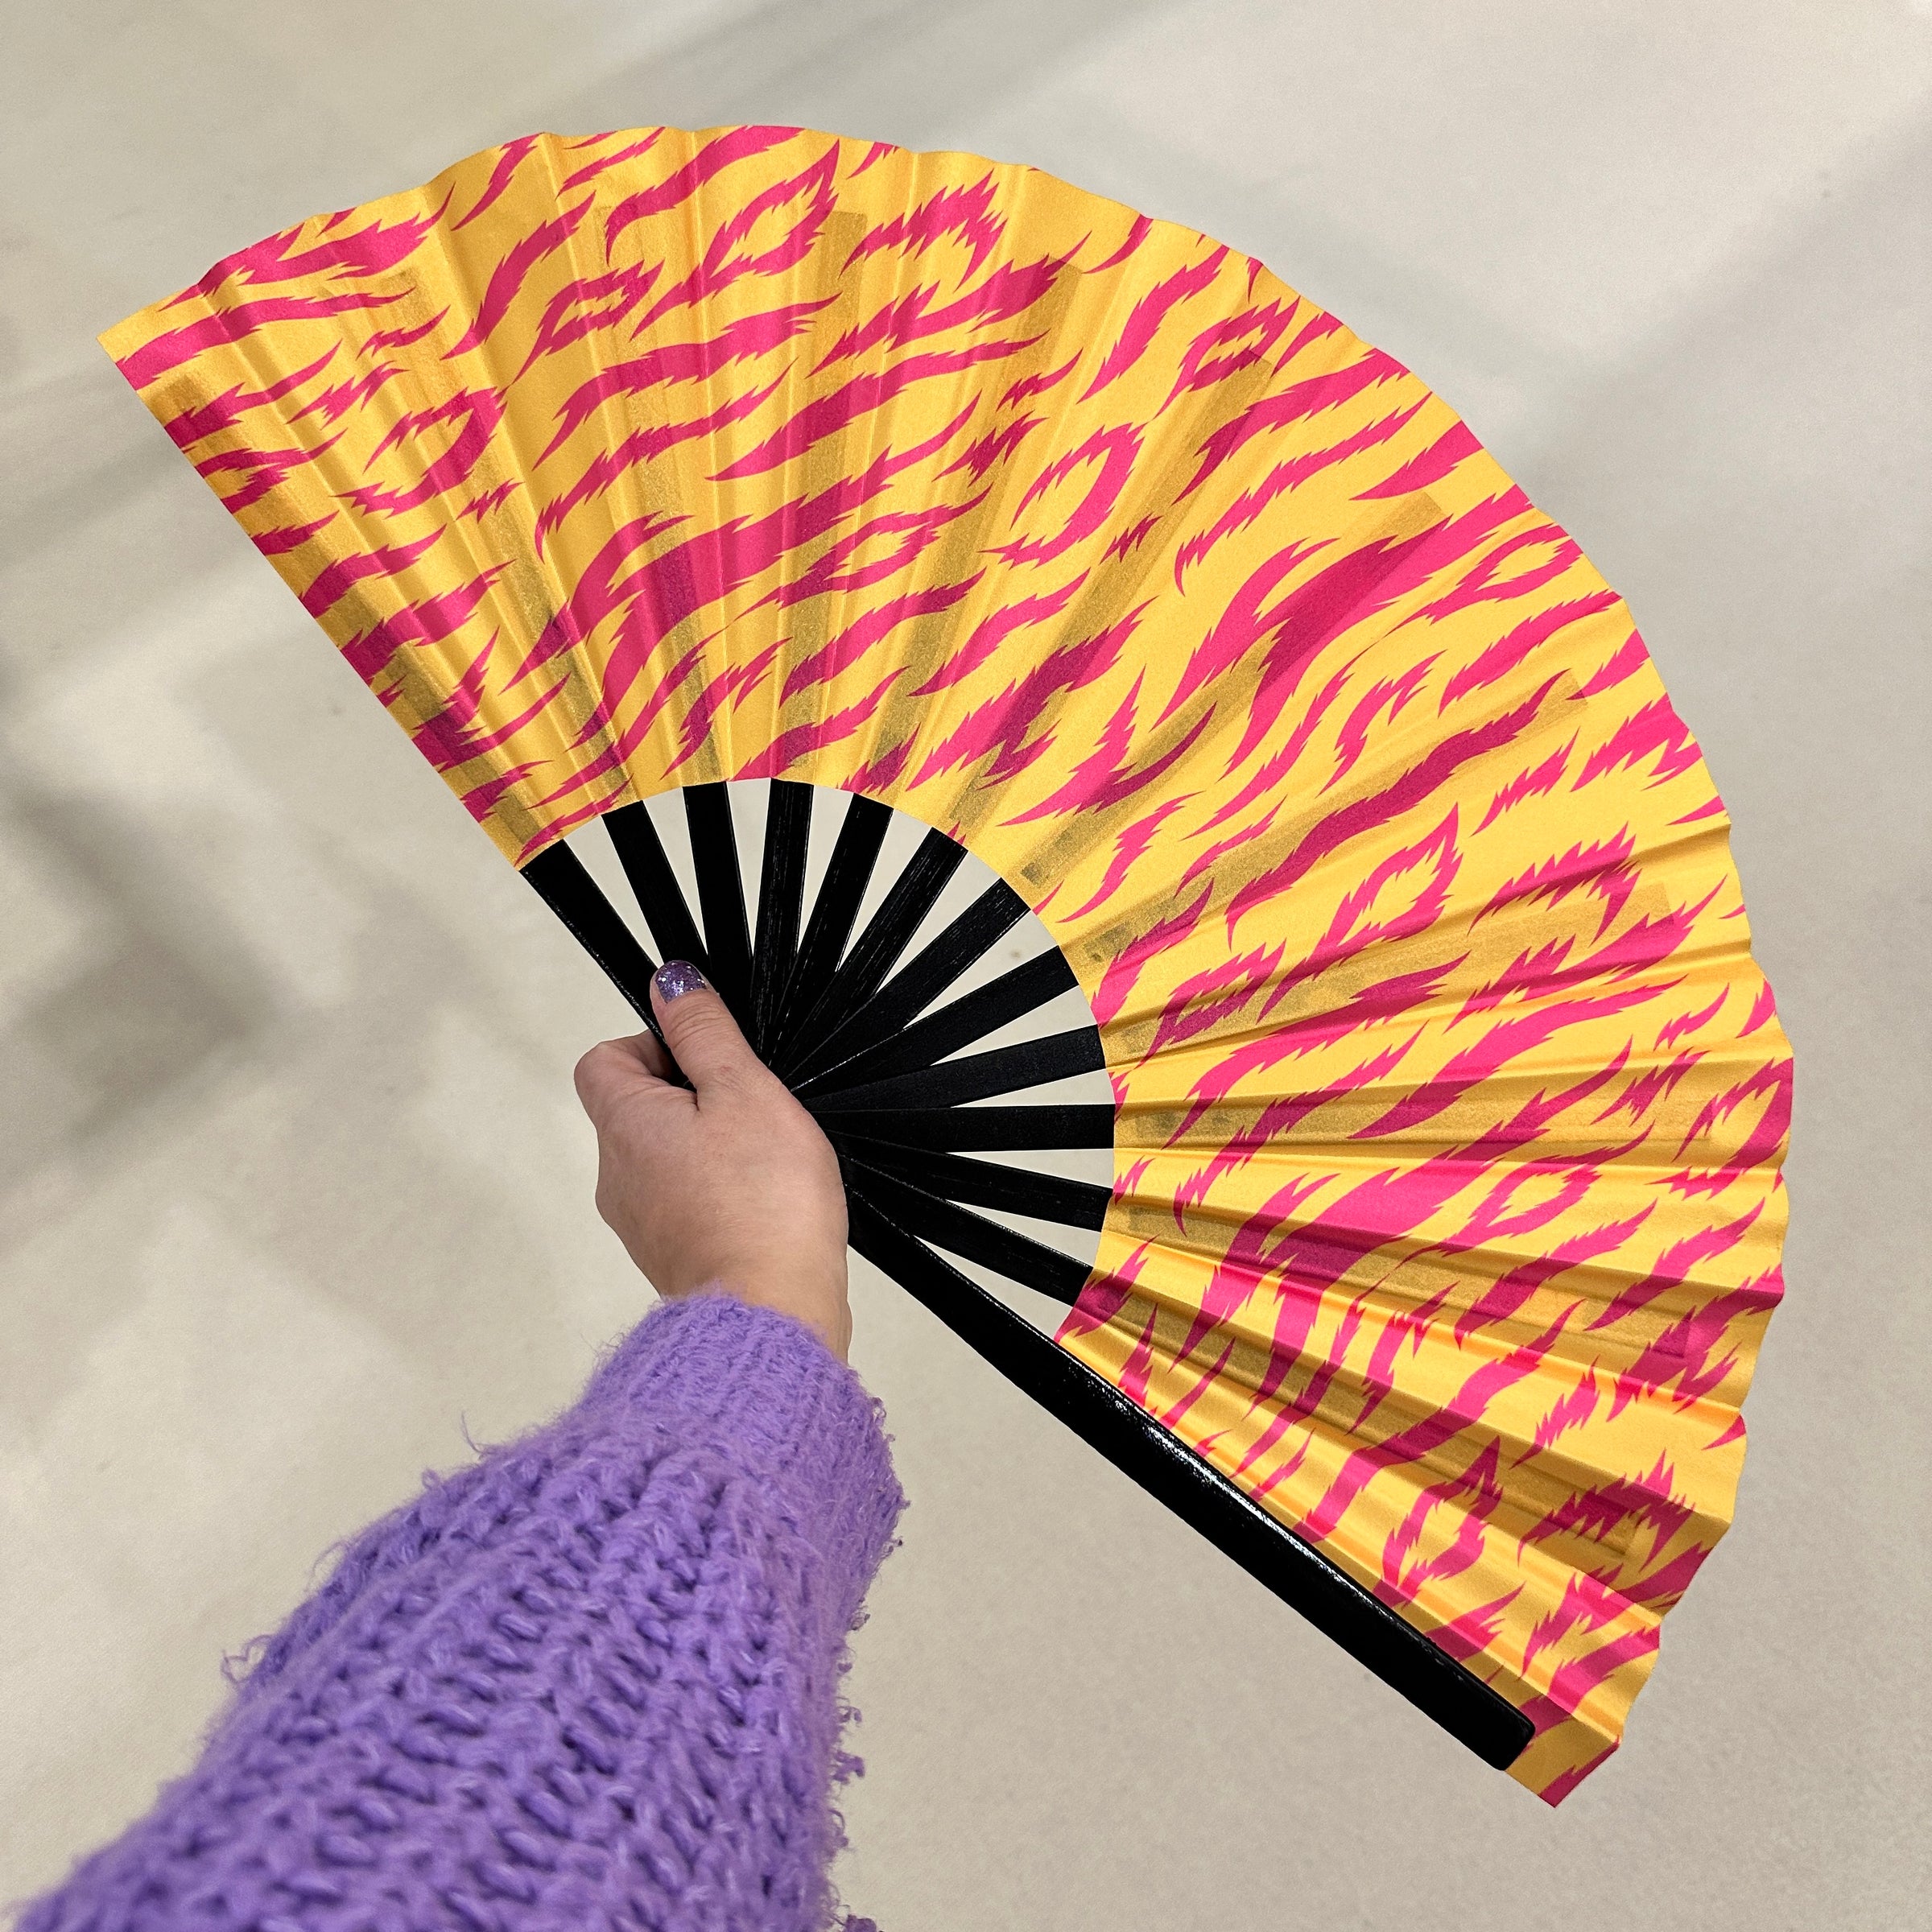 Giant Clacking Hand Fan with Orange & Pink Tiger Animal Print (Glows in UV!)